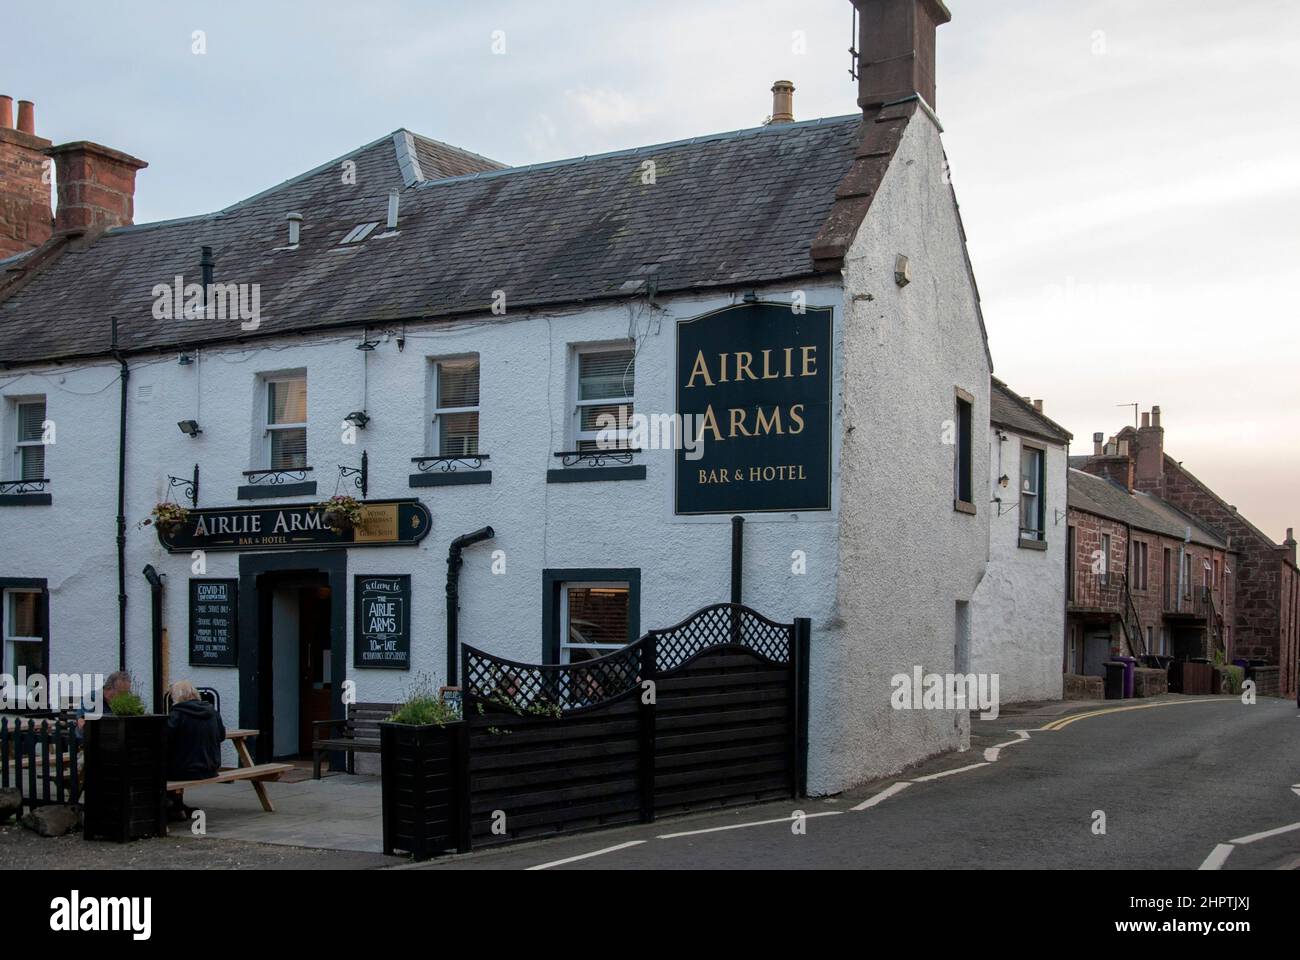 The Airlie Arms Bar and Hotel St Malcolms Wynd Kirriemuir Angus Scotland United Kingdom exterior view corner sited two-storey commercial hotel bar lou Stock Photo